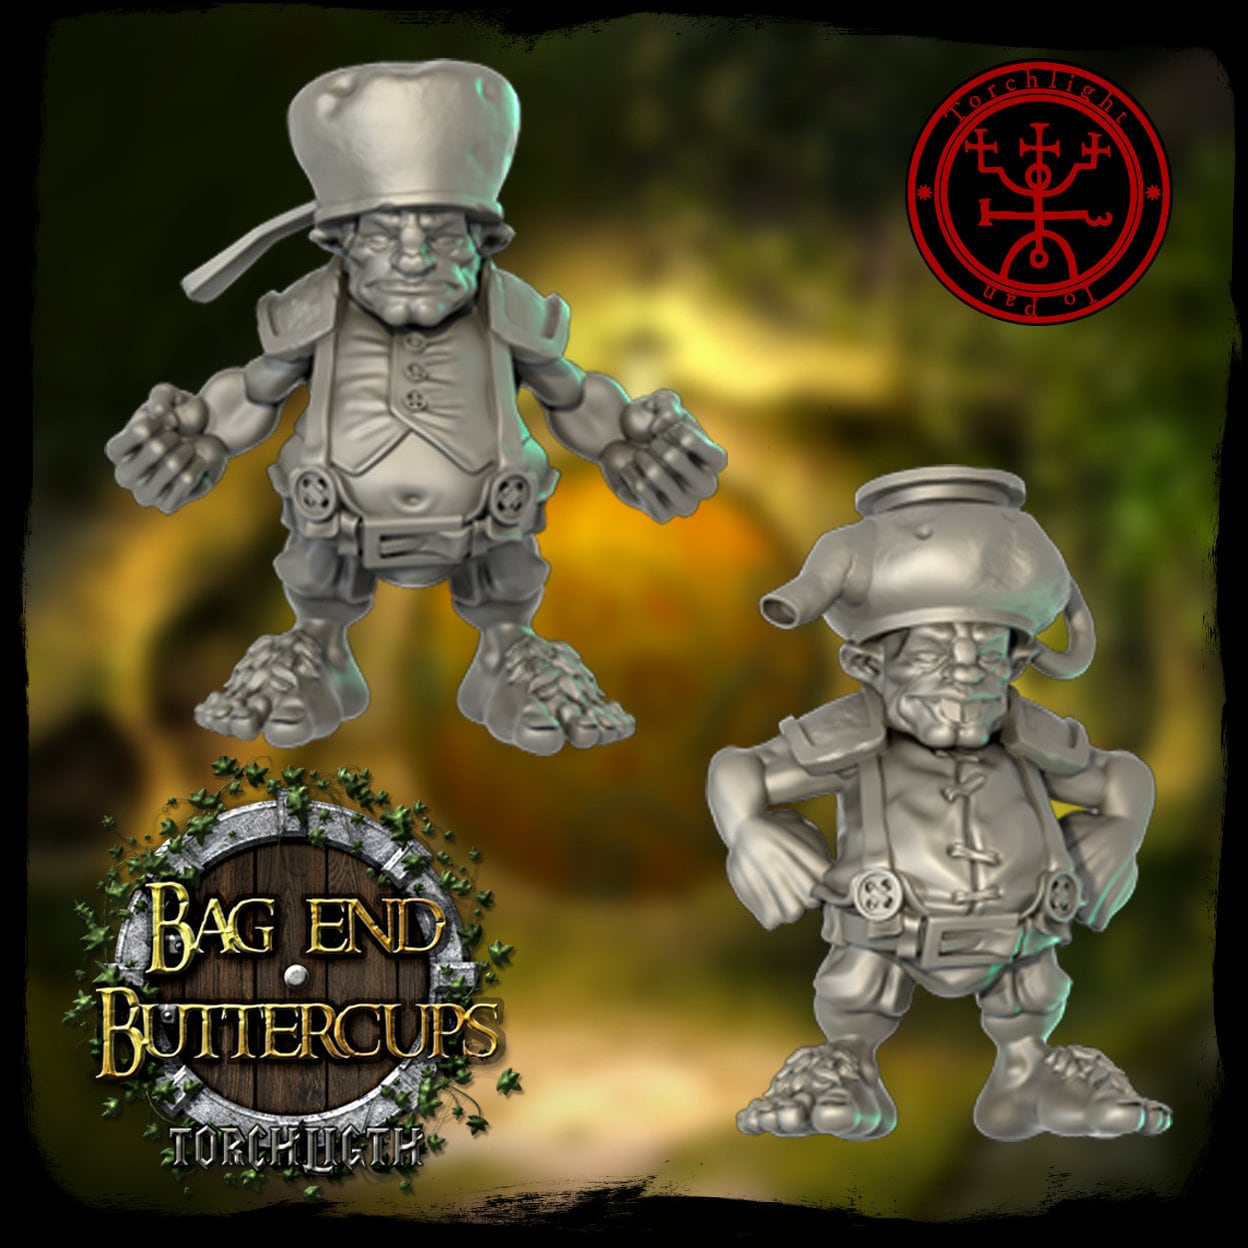 The Bag End Buttercups - Halfling Fantasy Football Team - 16 Players - Torchlight Models